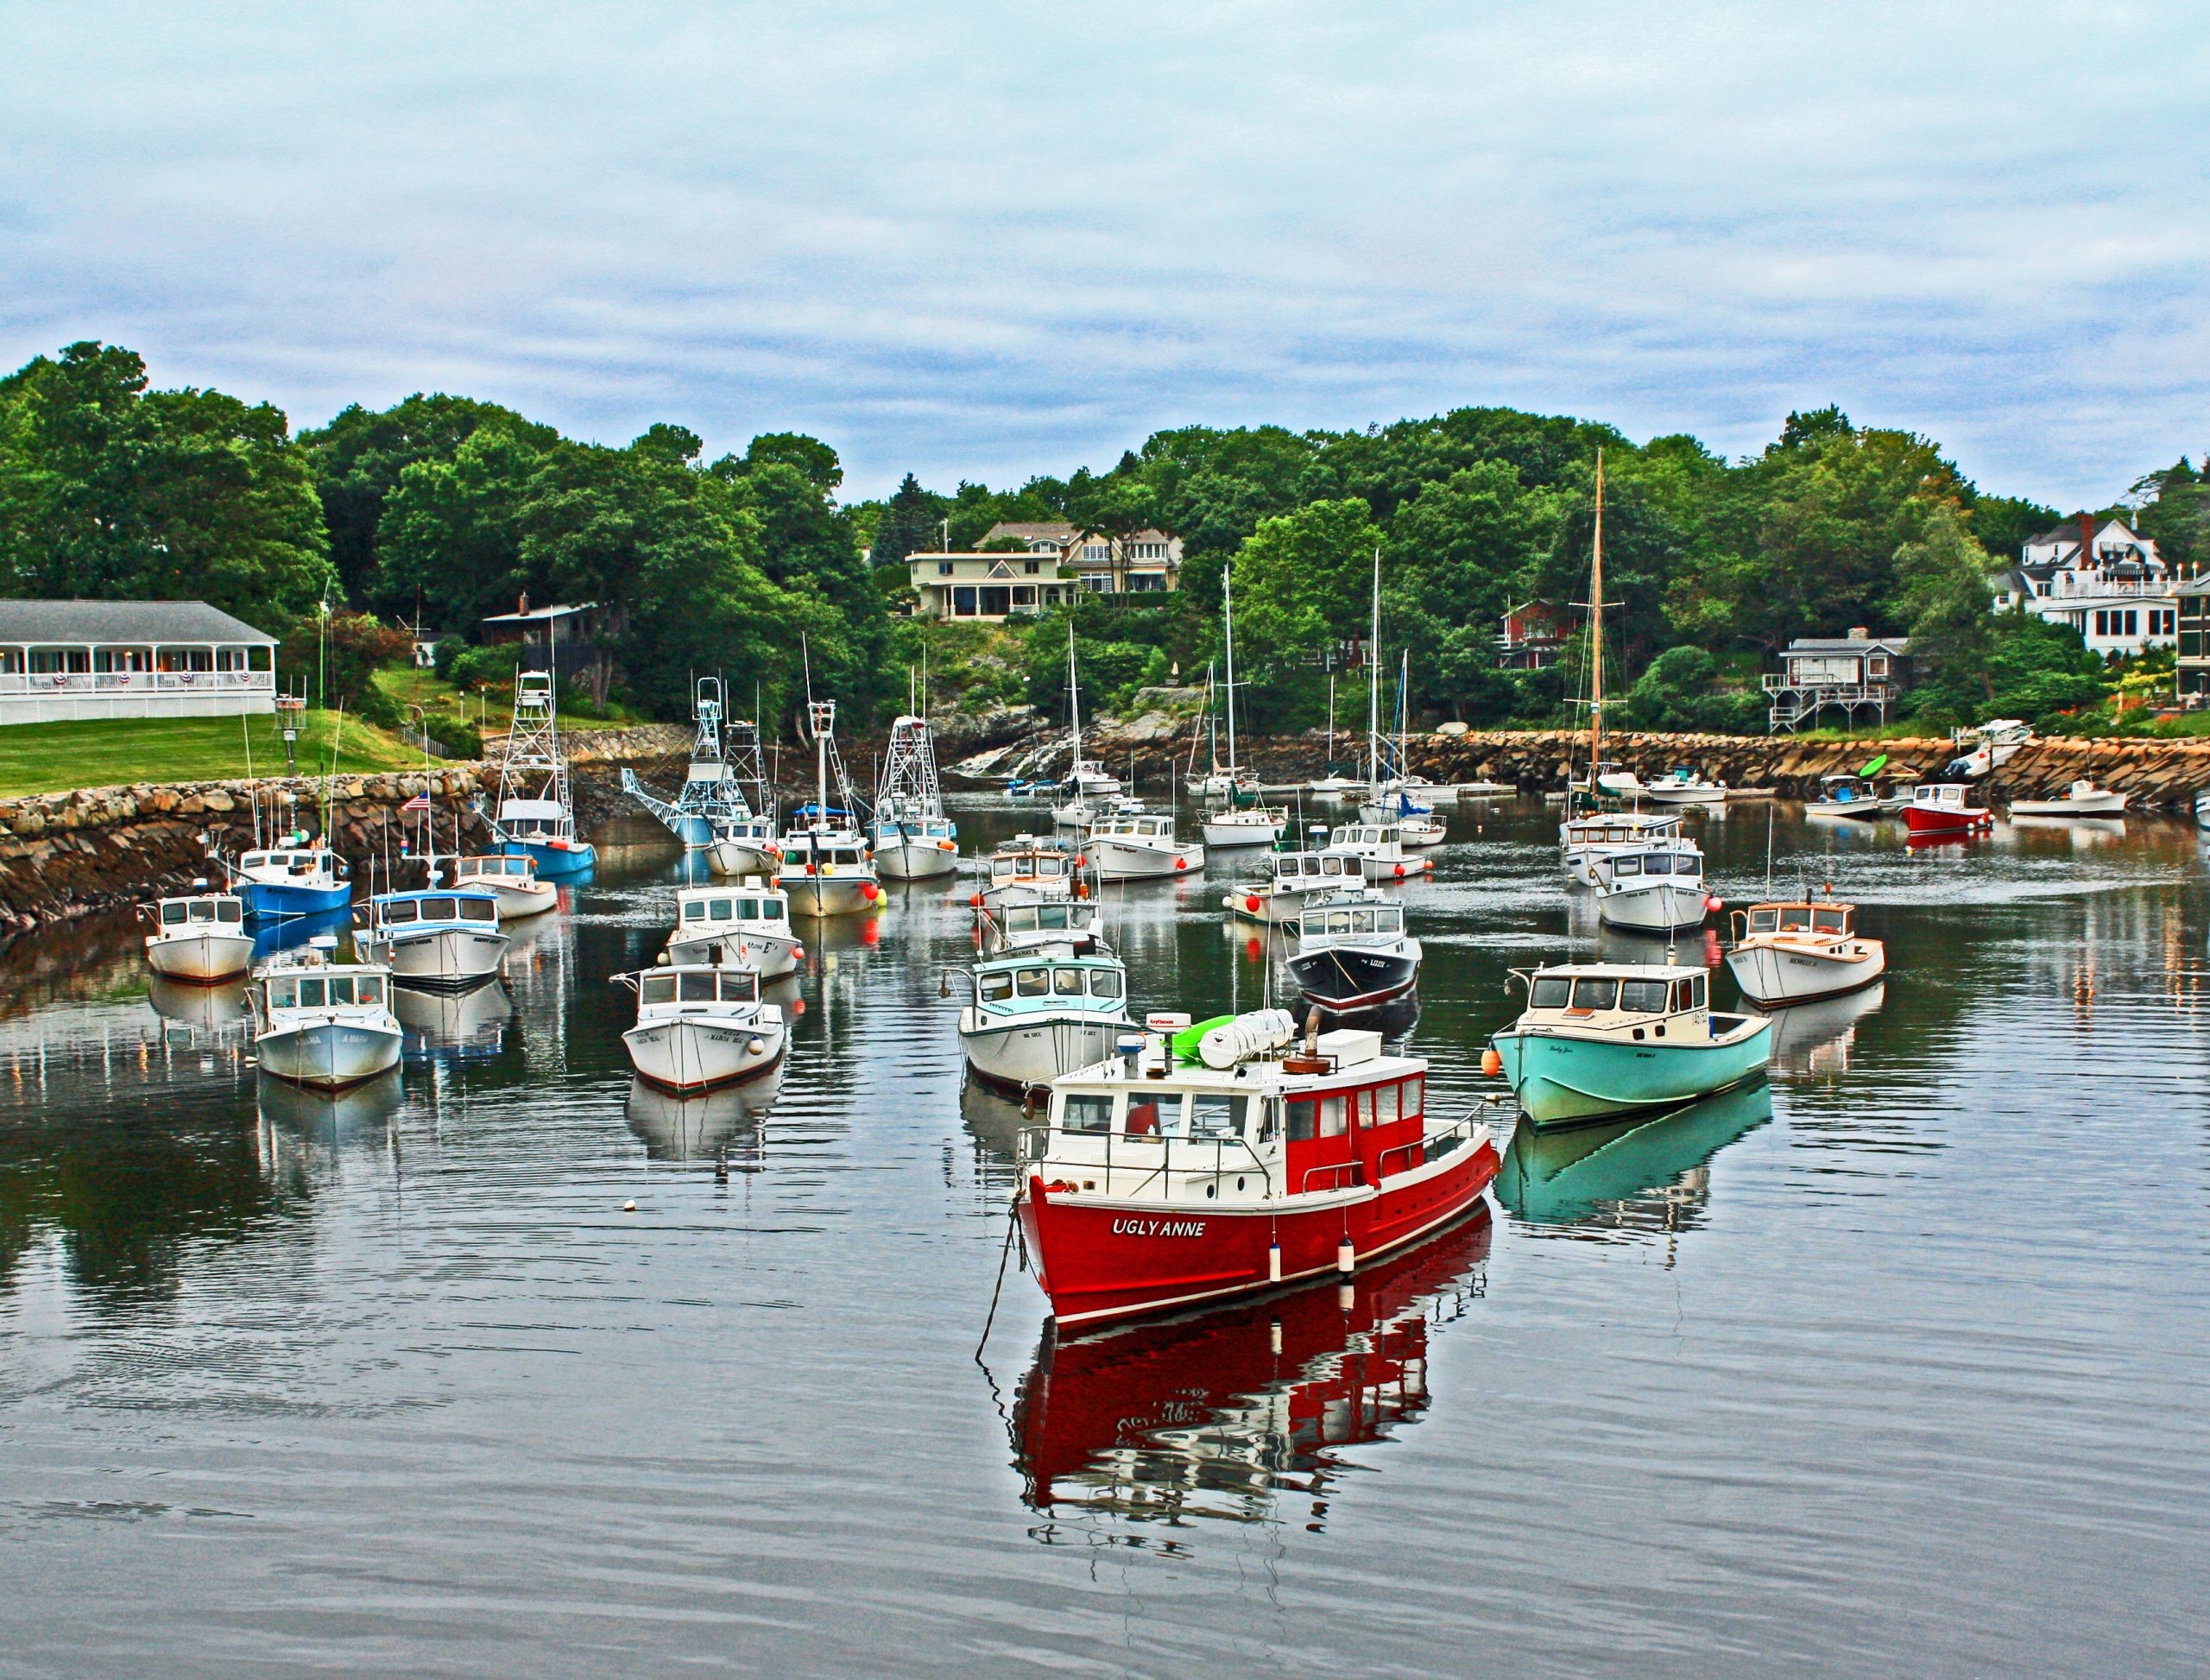 Boats At Perkins Cove (user submitted)